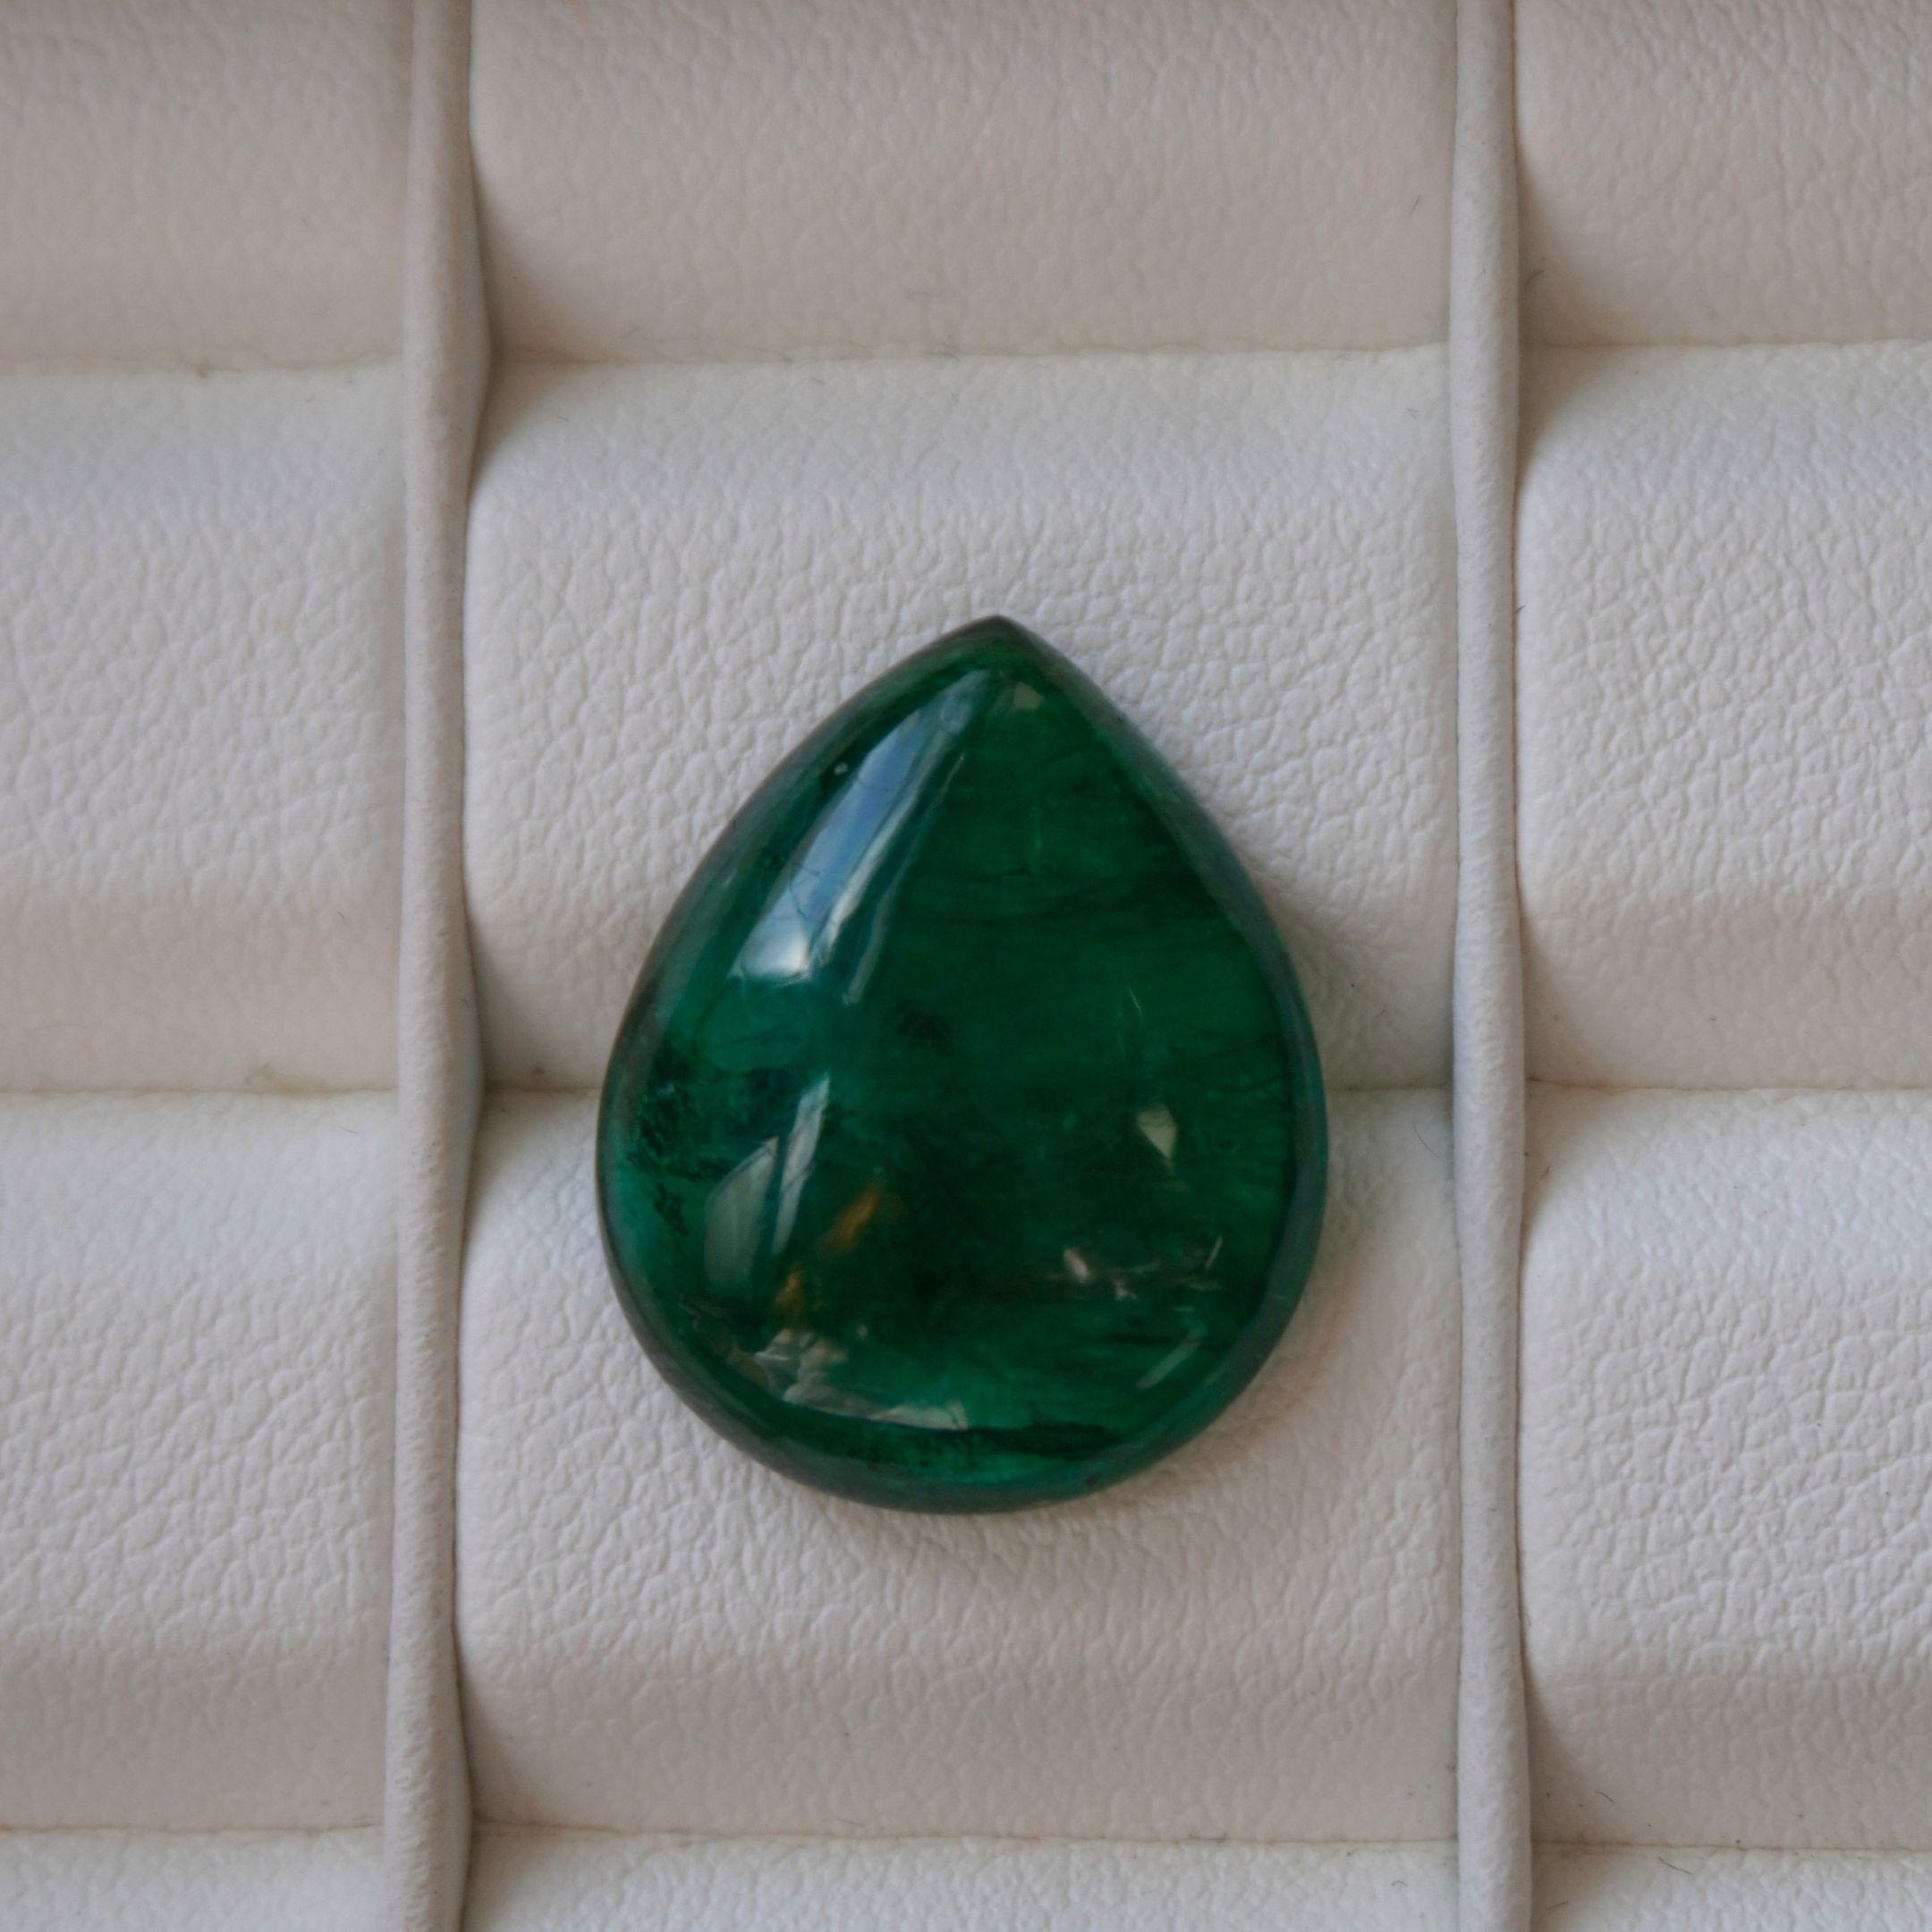 DETAILS
Emerald Weight: 10.90 CT
Measurements: 18.9 x 15.3 mm
Shape: Pear Cabochon
Color: Green
Hardness: 7.5 - 8
Birthstone: May
Natural

WANT TO CUSTOM ORDER?
We customize high jewelry made with quality gemstones and diamonds. Please allow custom